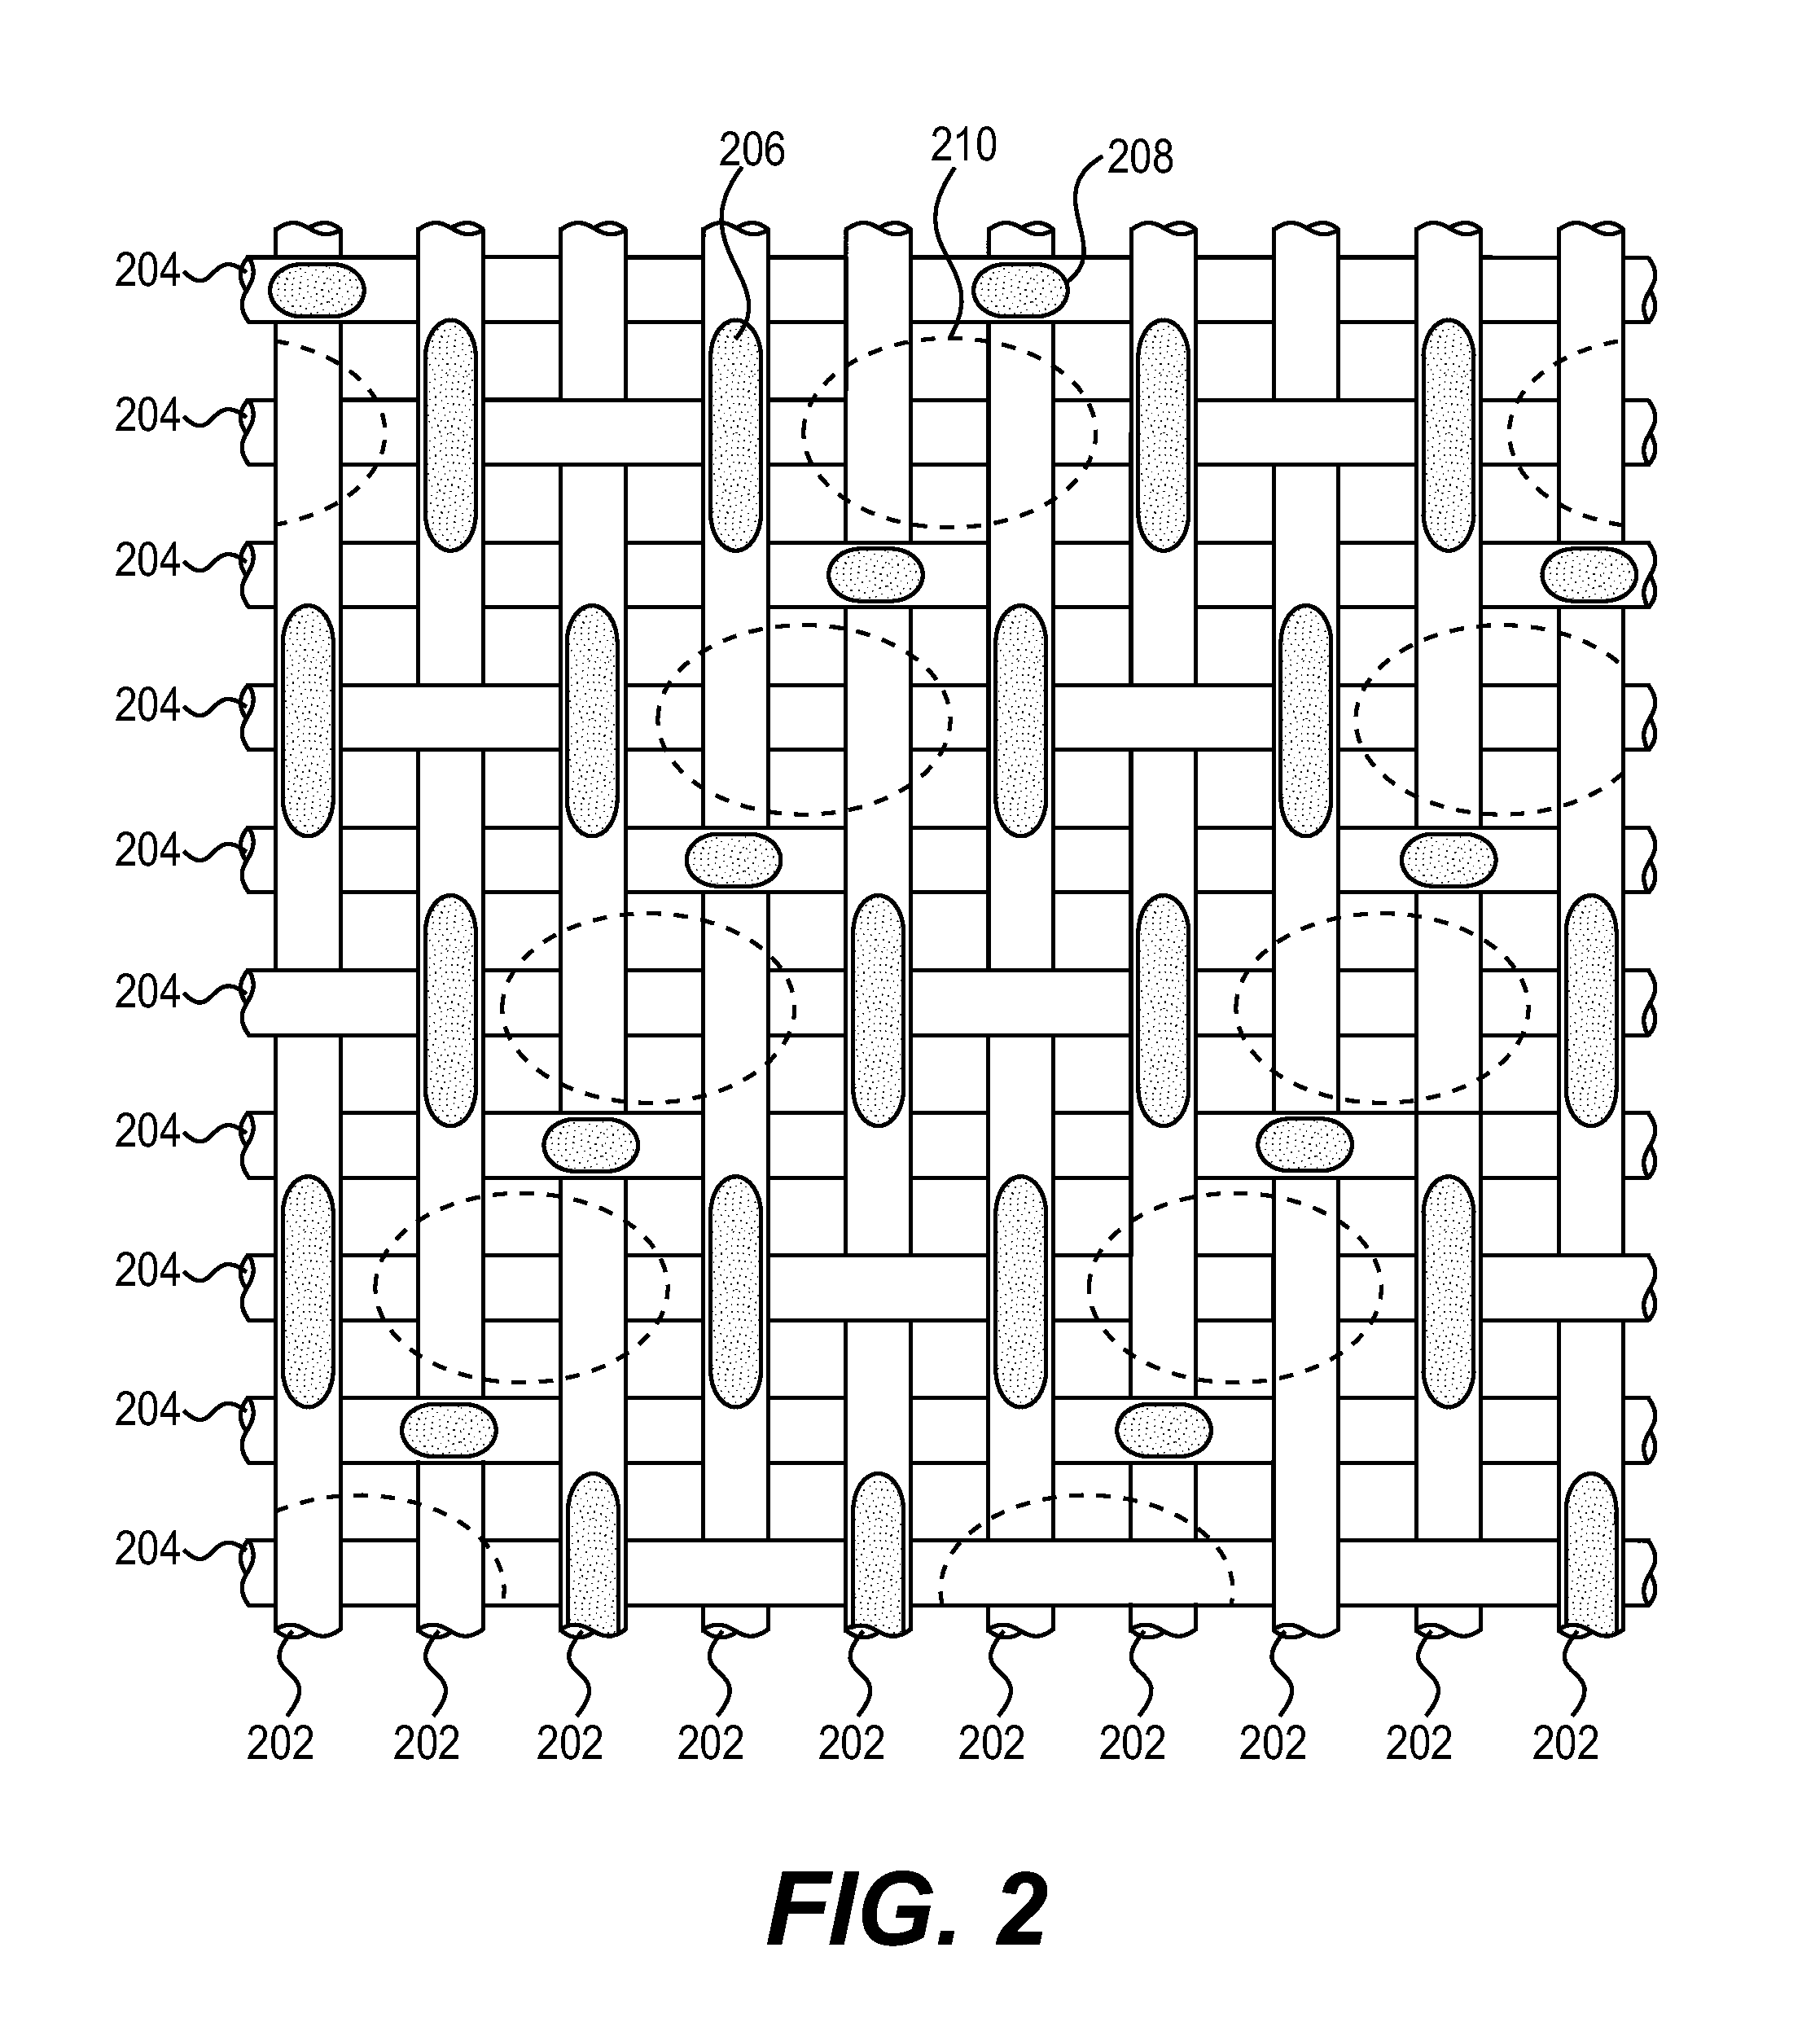 Apparatus, system, and process for determining characteristics of a surface of a papermaking fabric